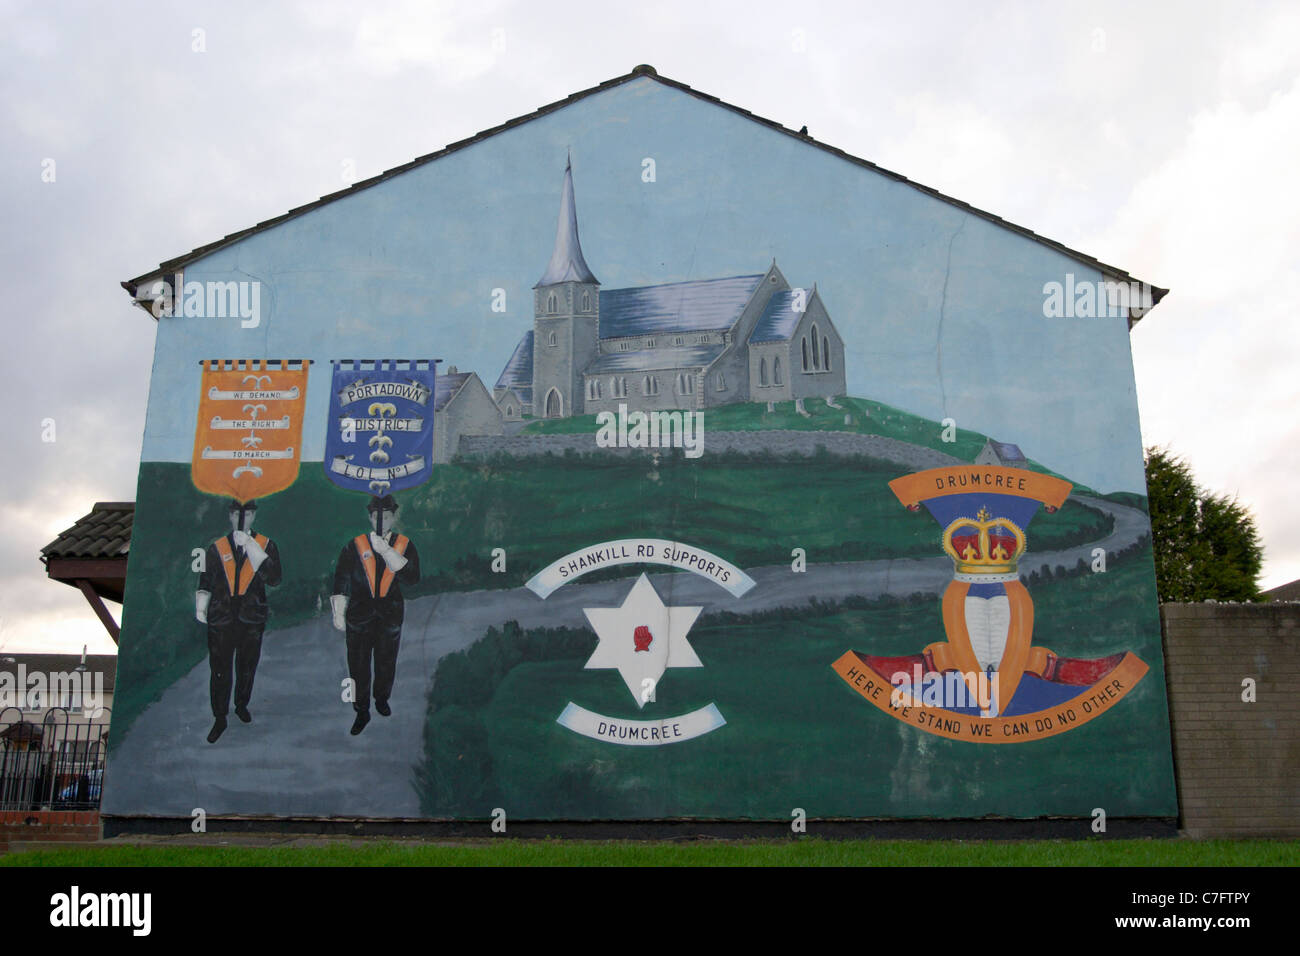 shankill road supports drumcree loyalist wall mural painting west belfast northern ireland Stock Photo